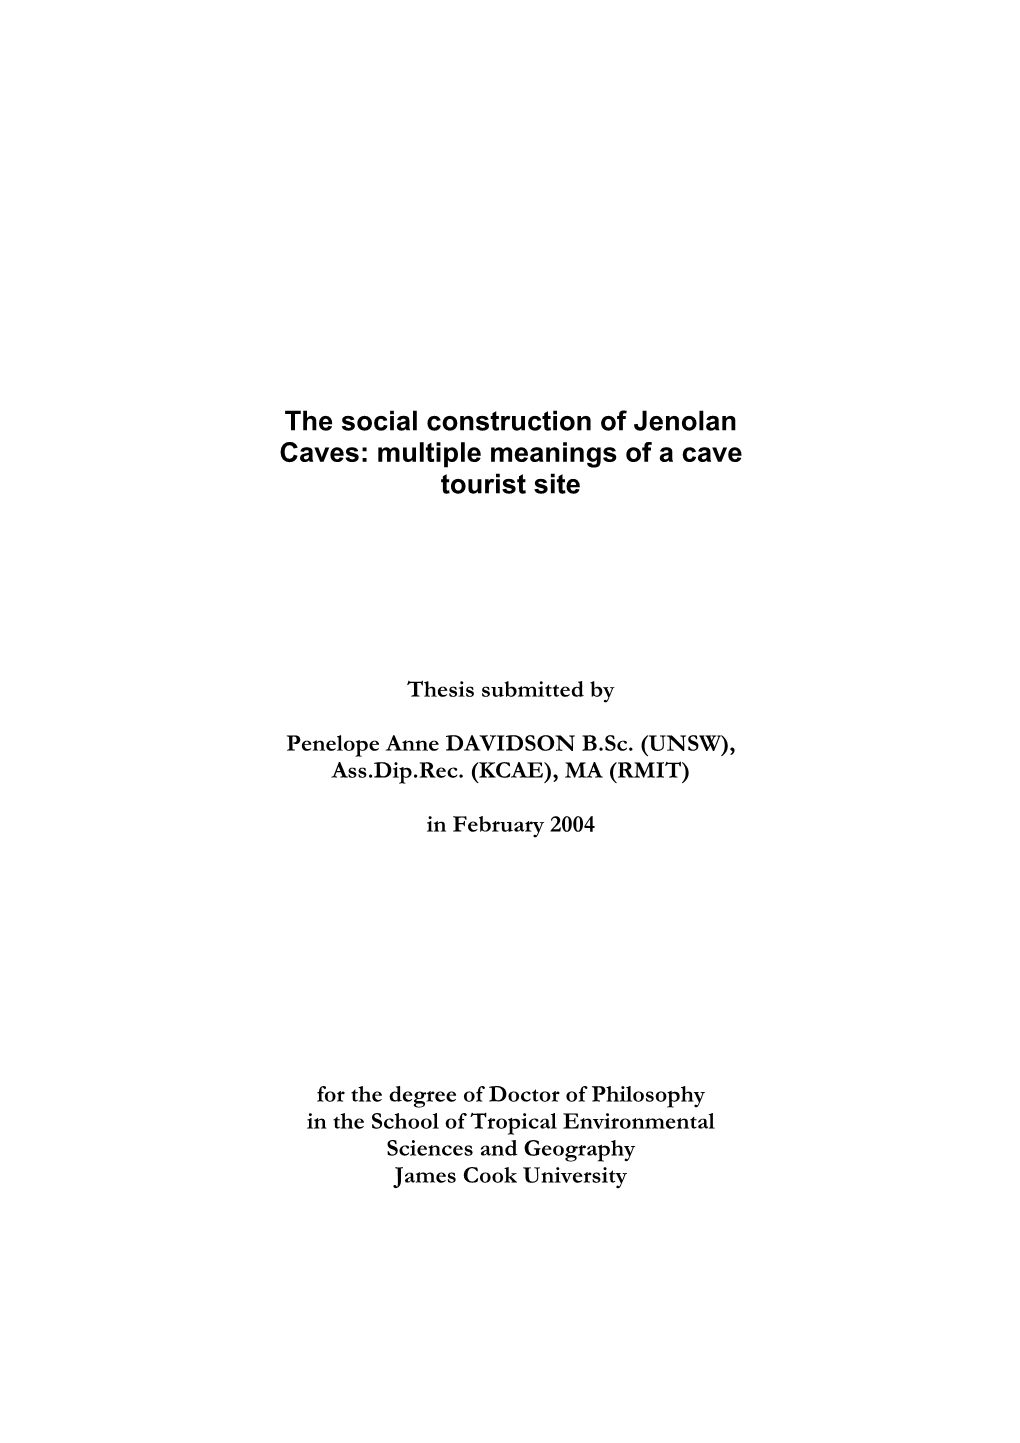 Social Construction of Jenolan Caves: Multiple Meanings of a Cave Tourist Site